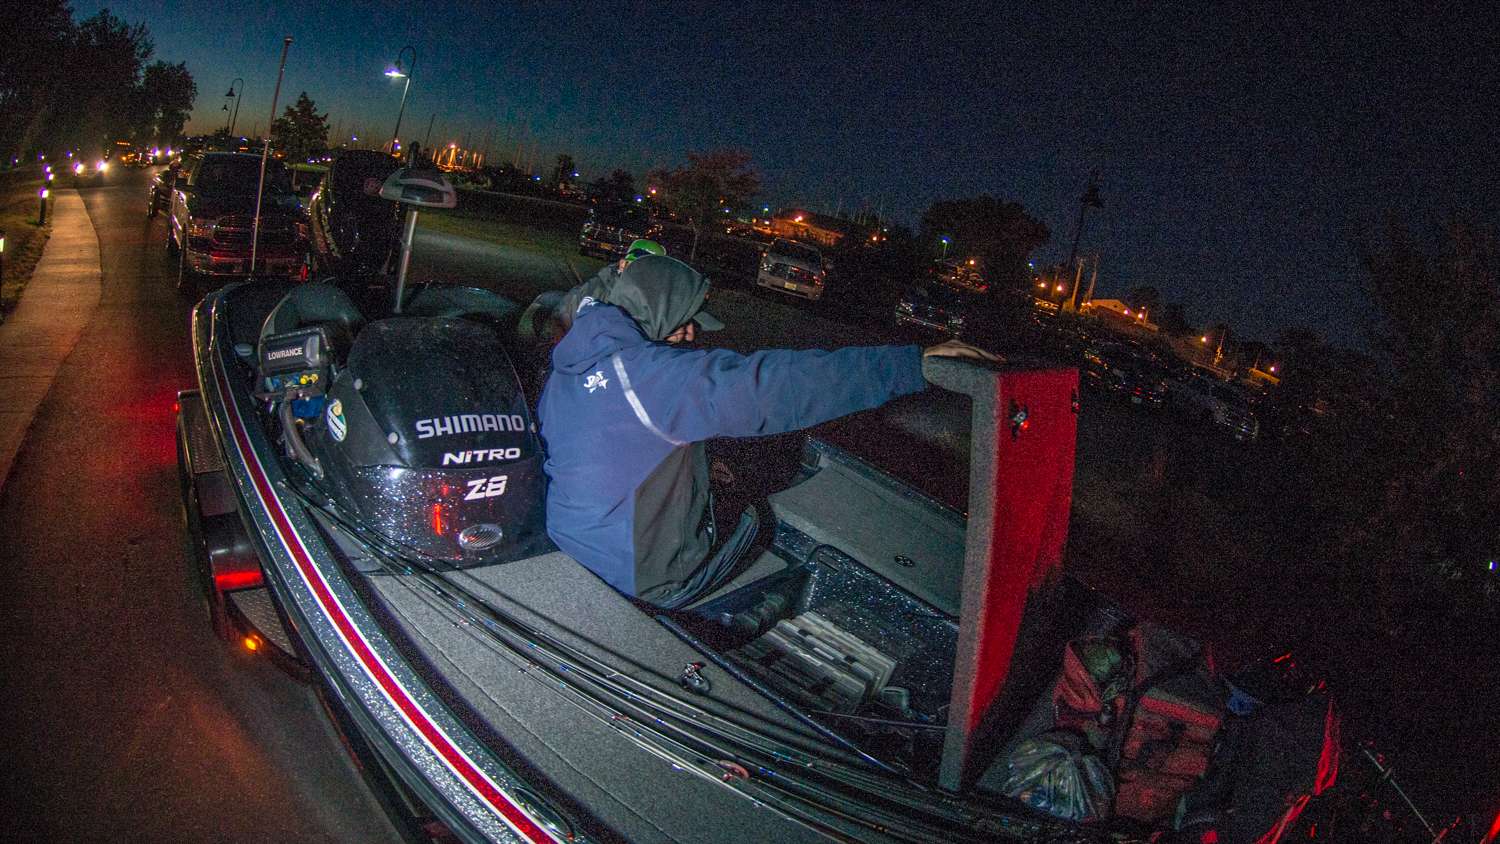 While waiting in line to launch several anglers finish rigging up their Day 1 baits. 